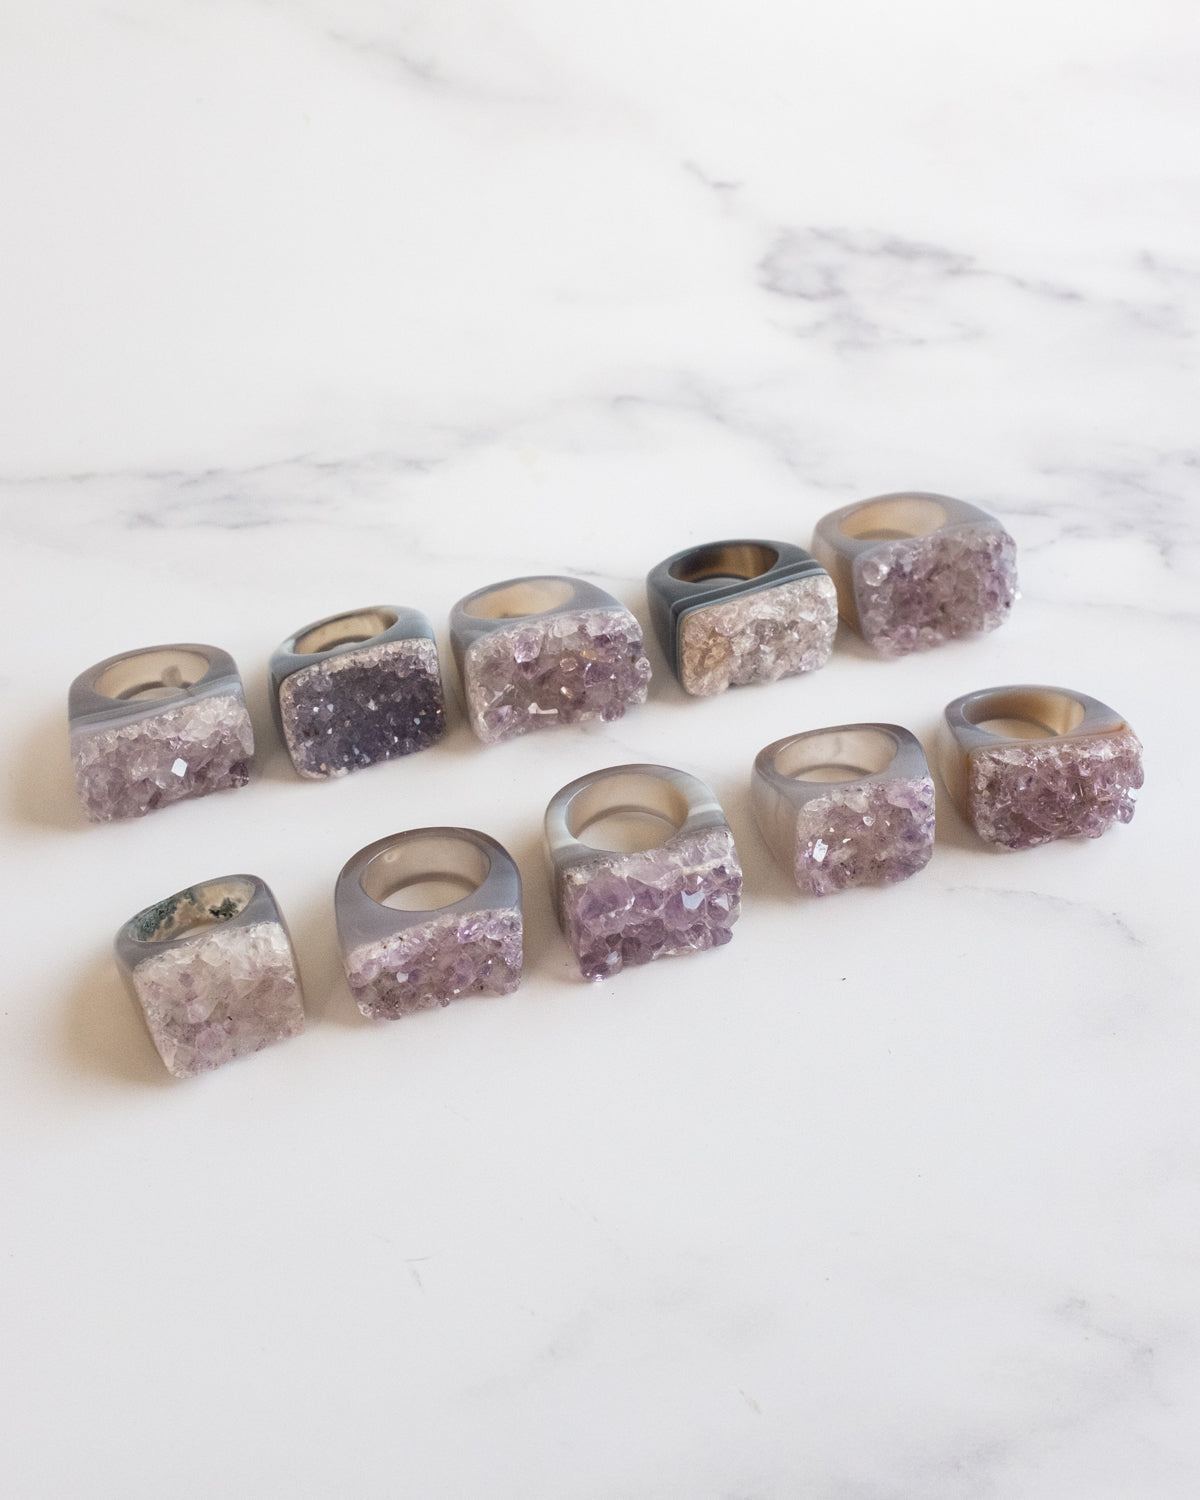 Raw Amethyst Ring - Size 7 US / O UK - The Healing Pear